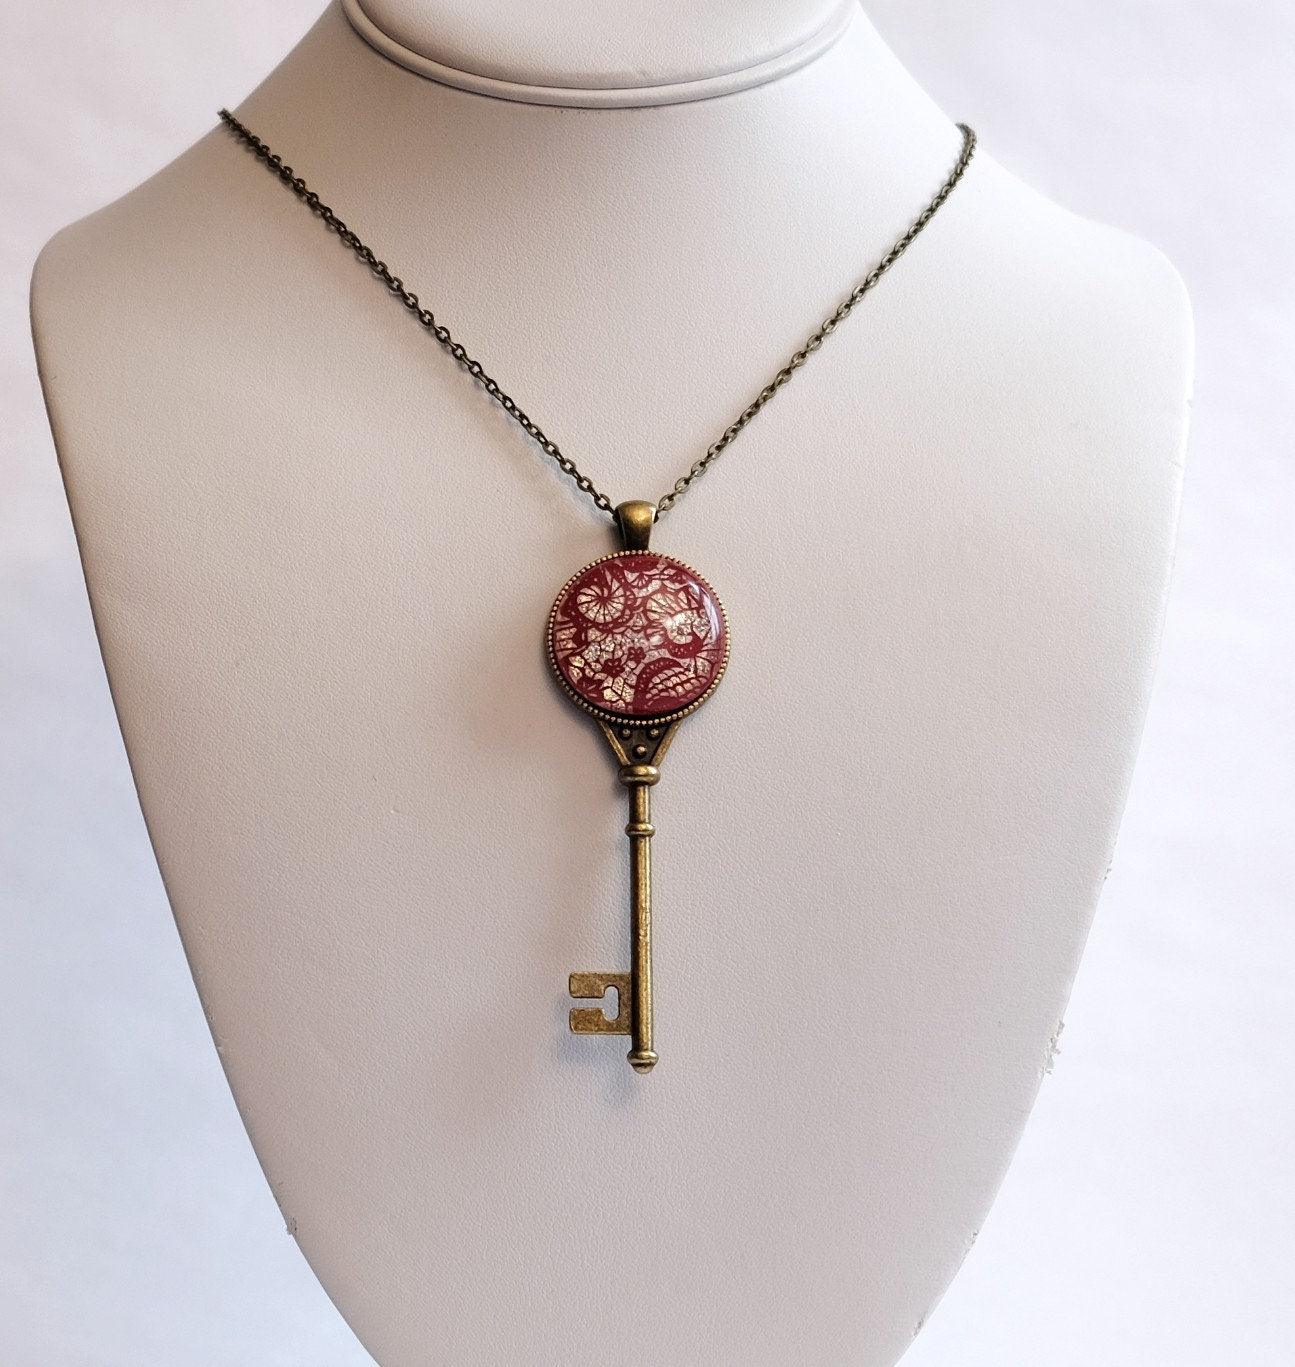 Antiqued Brass Skeleton Key pendant necklace with Fused Glass red lace Dichroic cabochon on 24 inch brass plated chain jewelry  steam punk and Victorian style seeds glassworks seedsglassworks